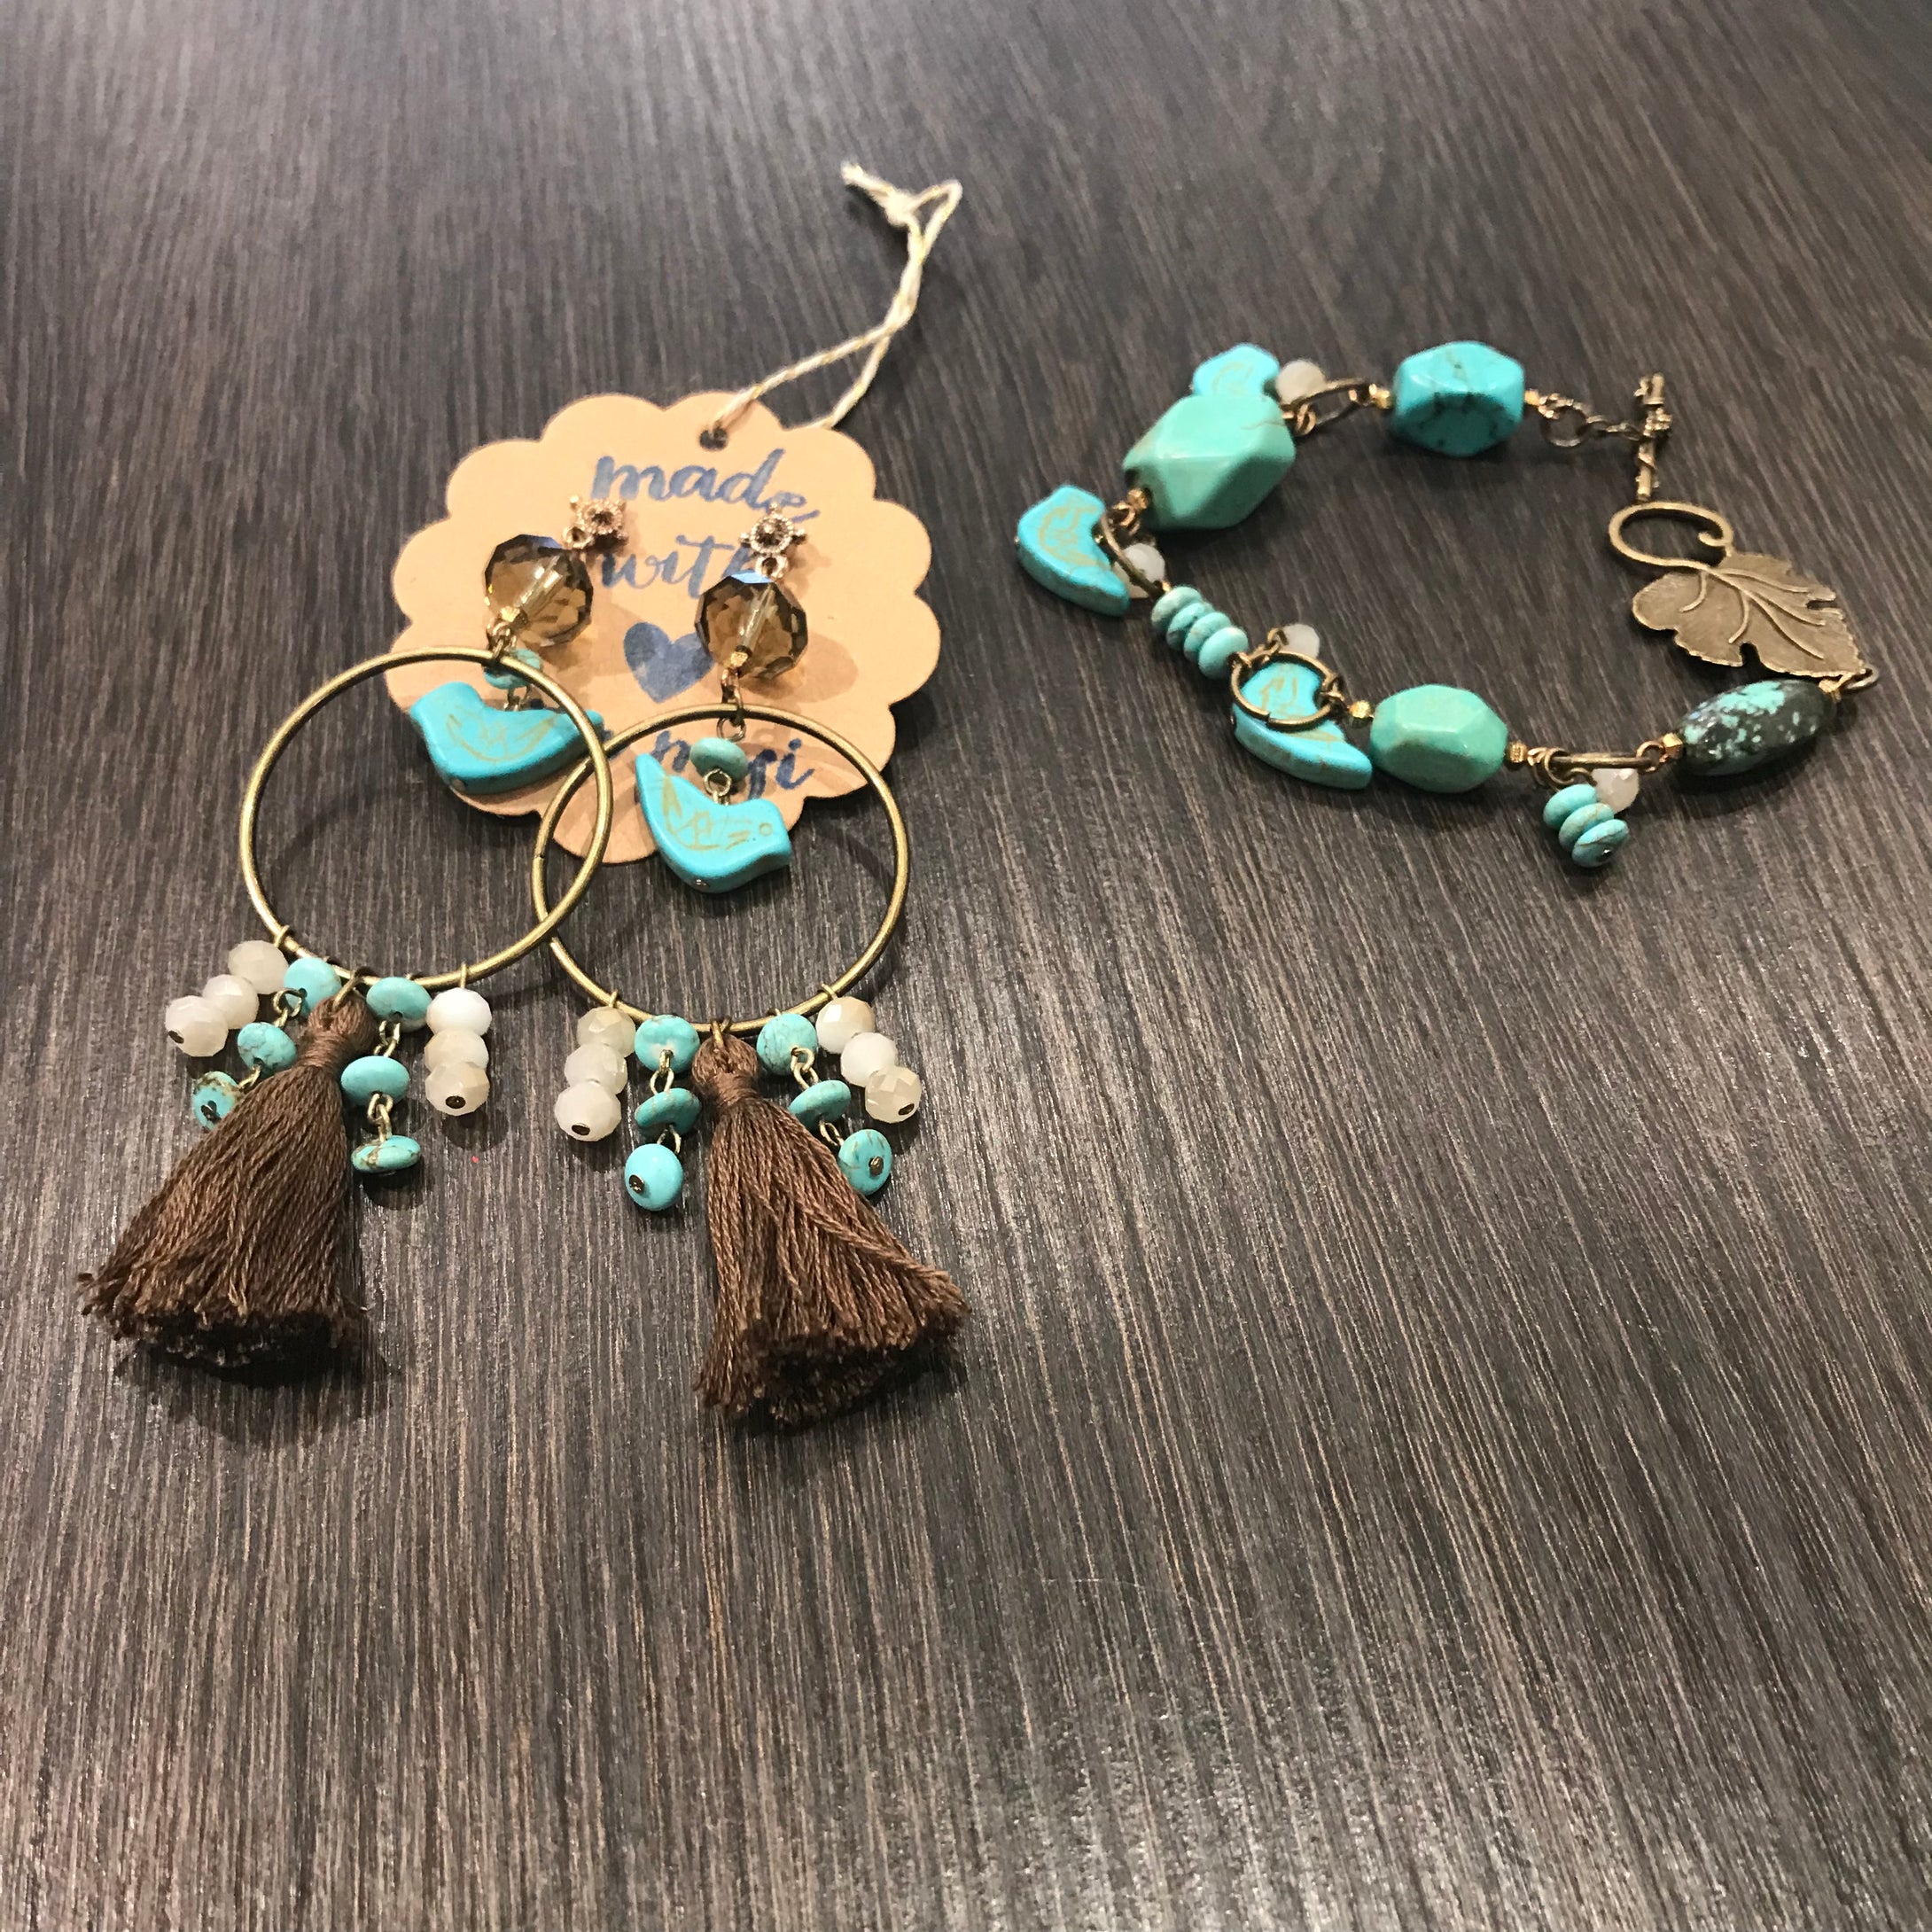 Hand made Set with Turquoise